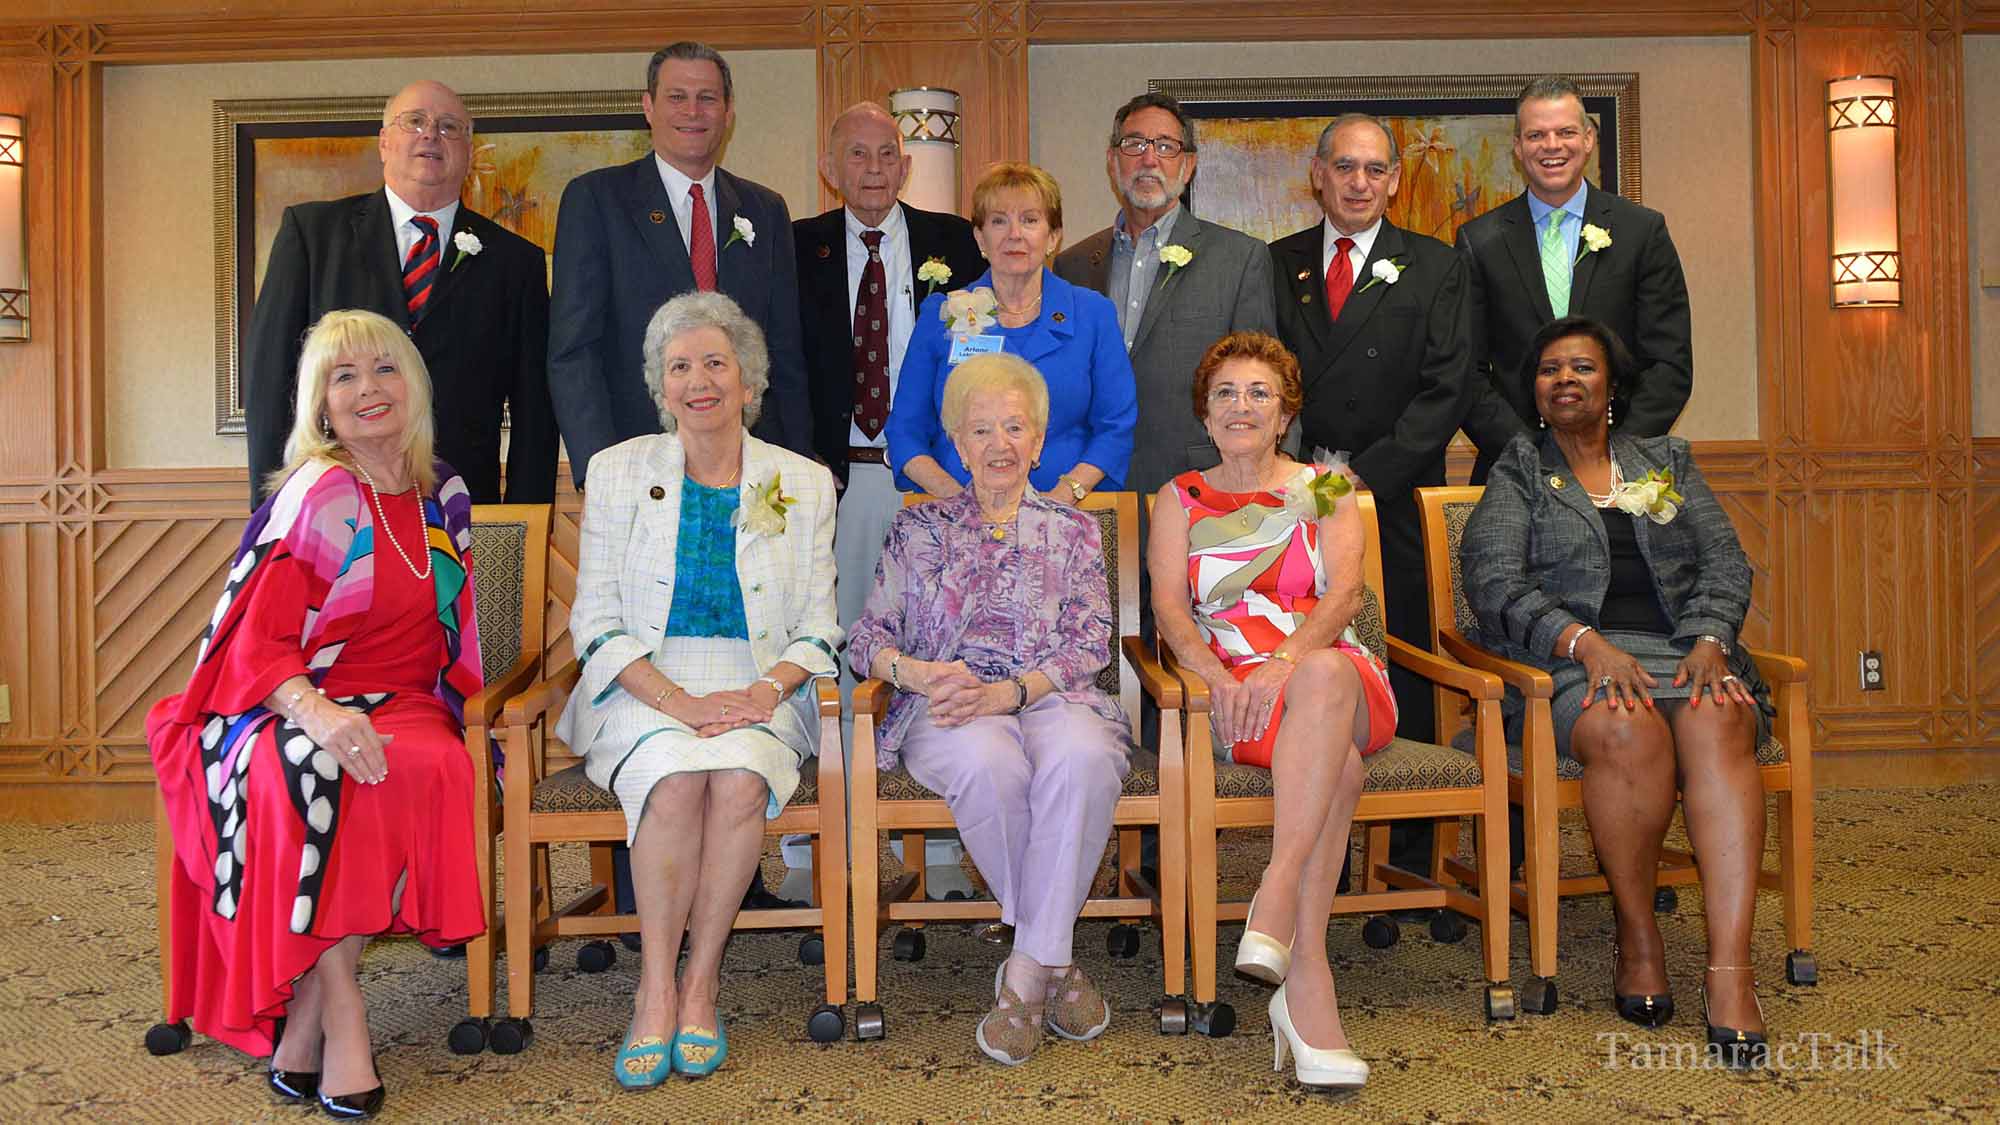 Ten Residents Are inducted into the Broward County Senior Hall of Fame 1